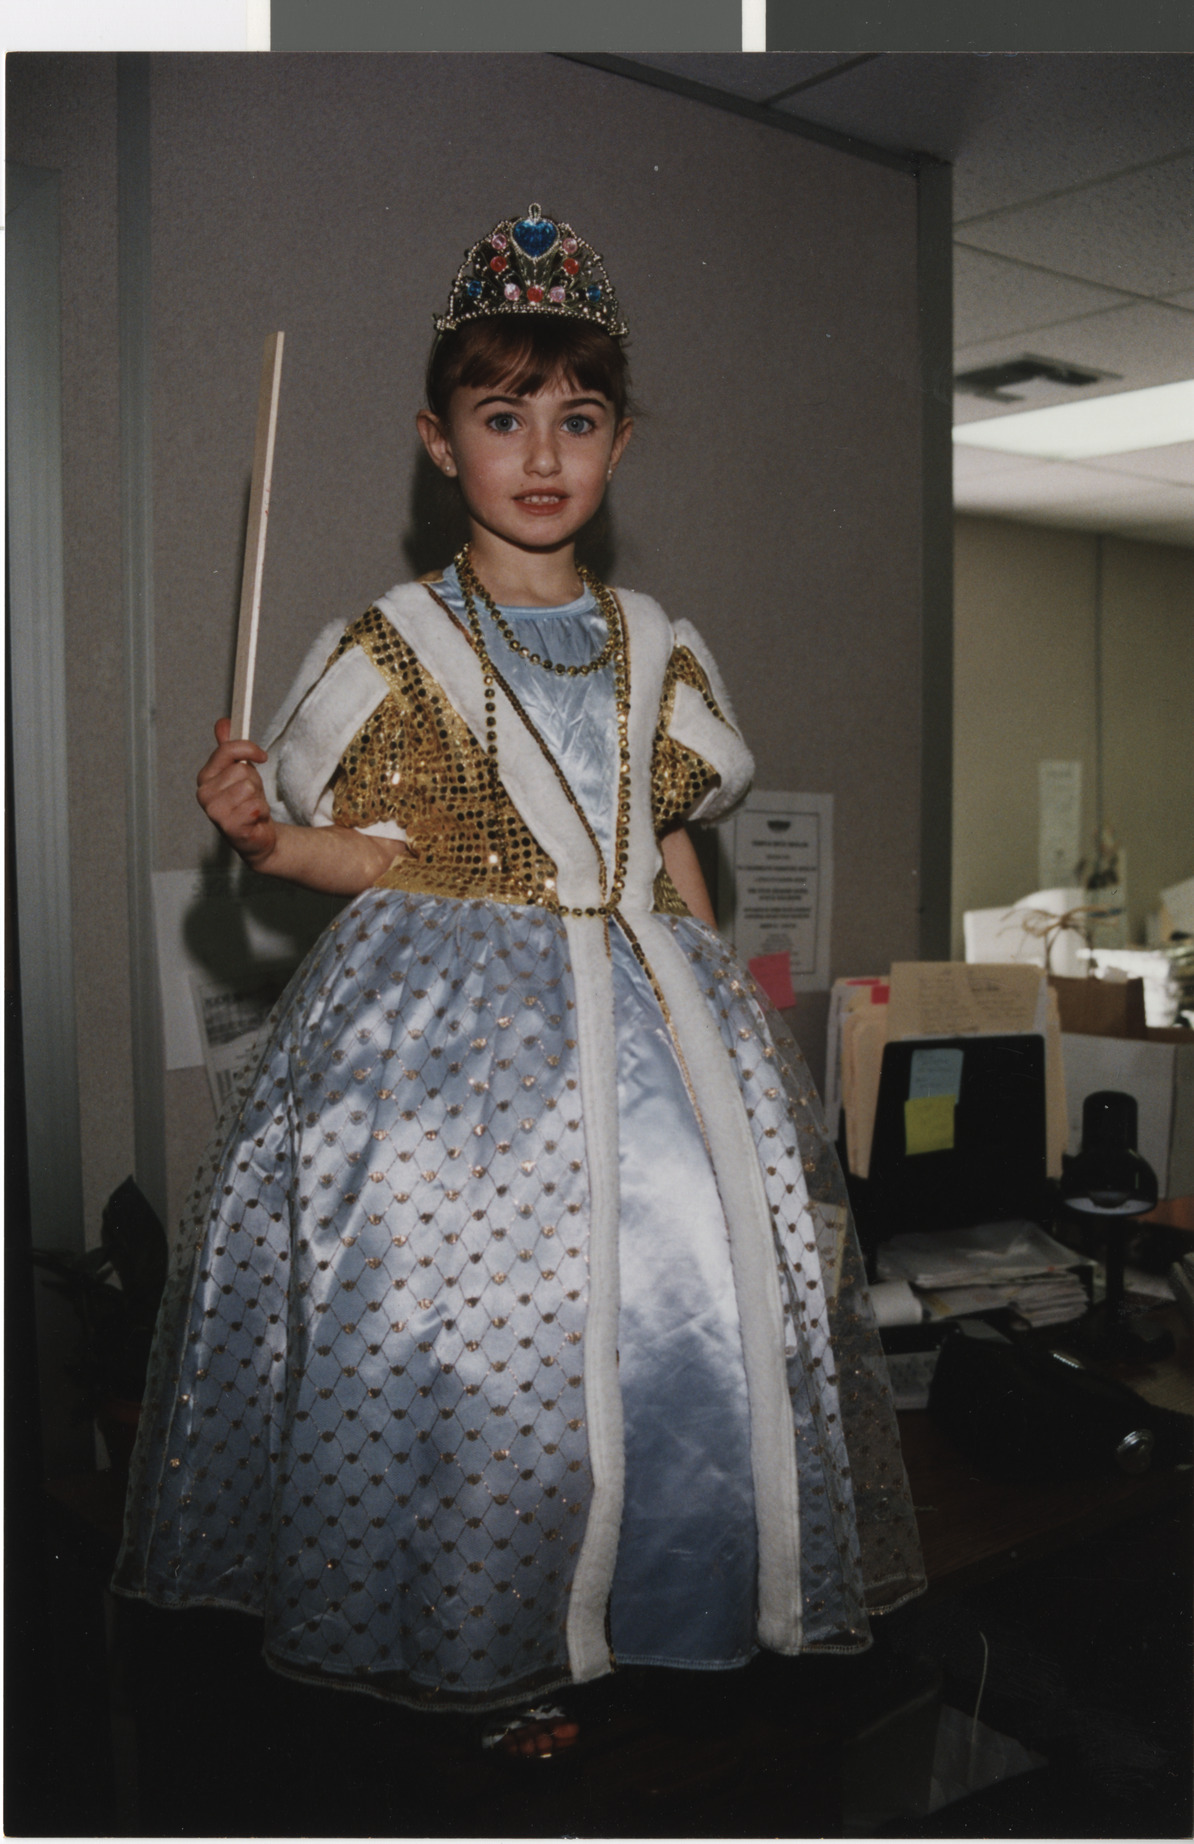 Photograph of a child dressed in costume, 1990s